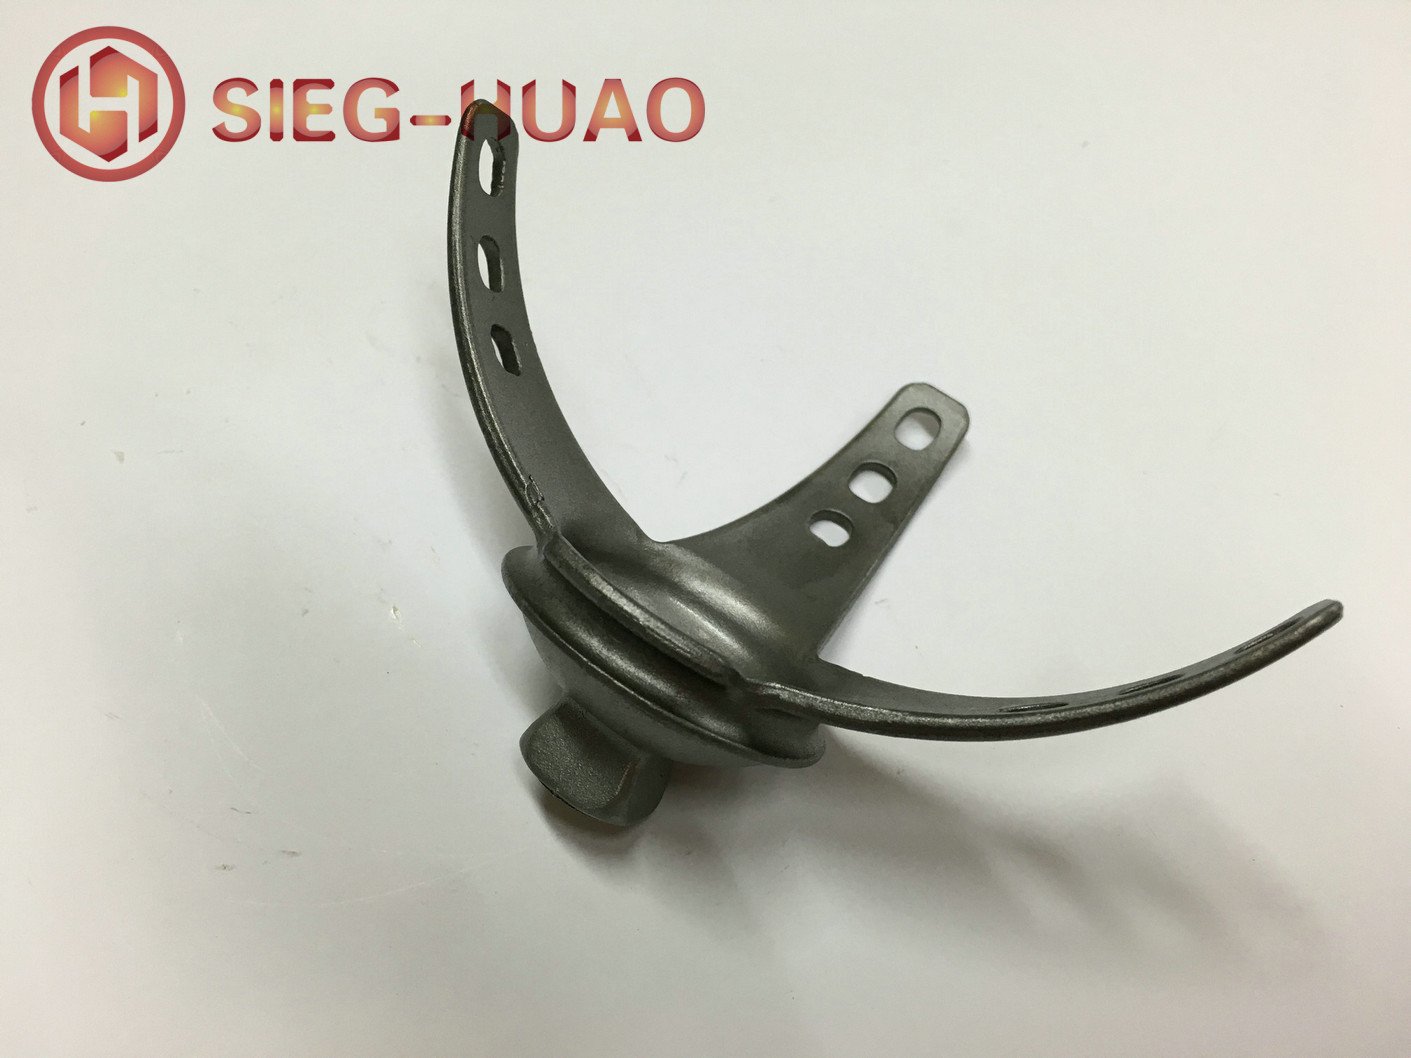 Investment Casting High Nickel Alloy Support for Artificial Limb